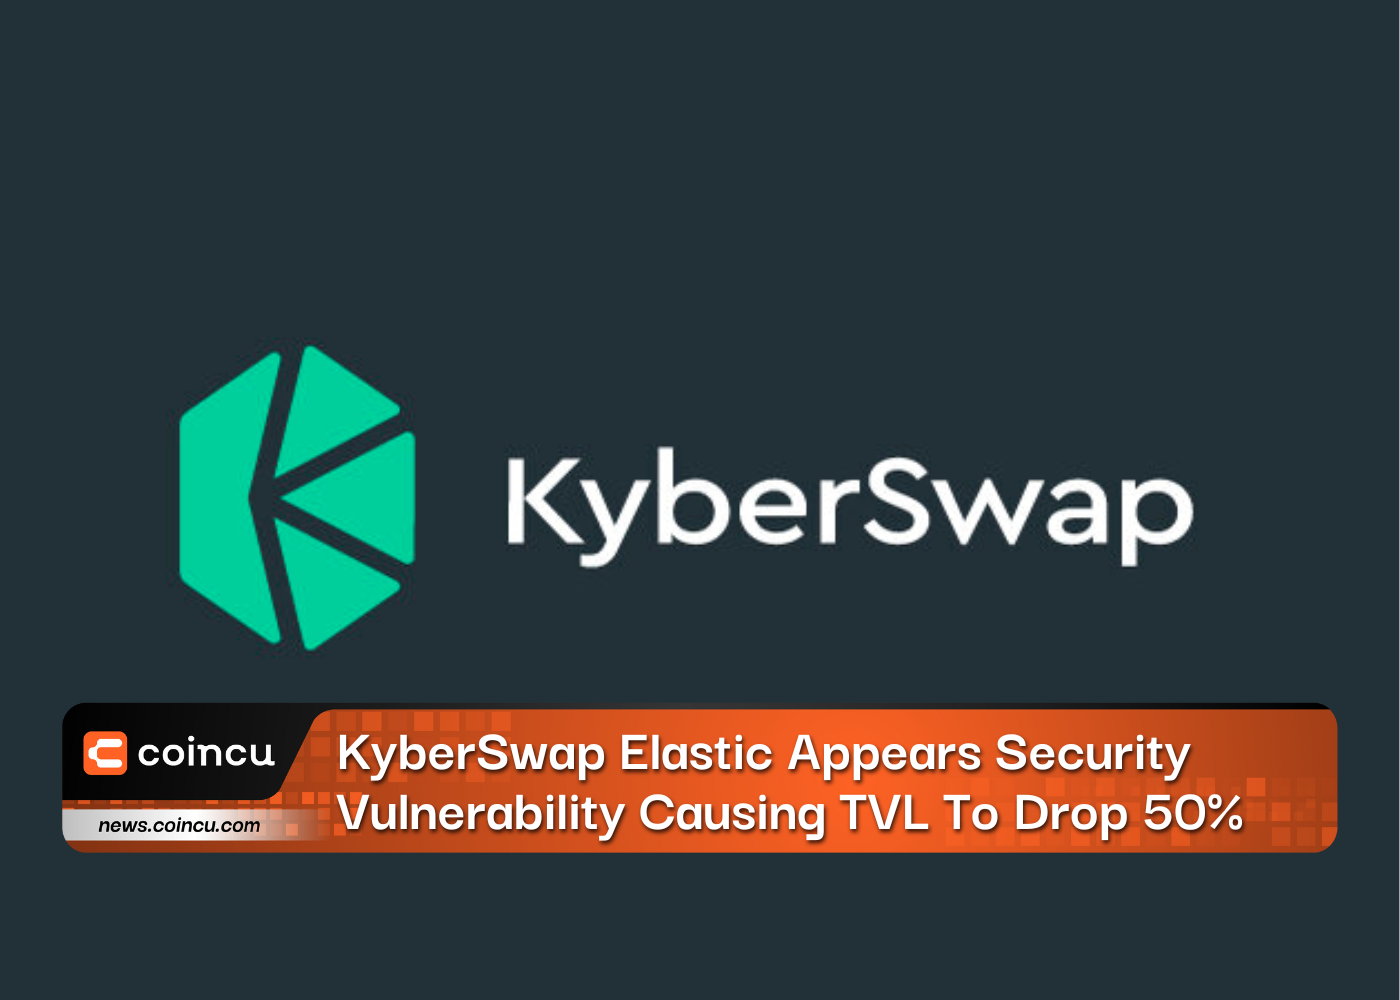 KyberSwap Elastic Appears Security Vulnerability Causing TVL To Drop 50%